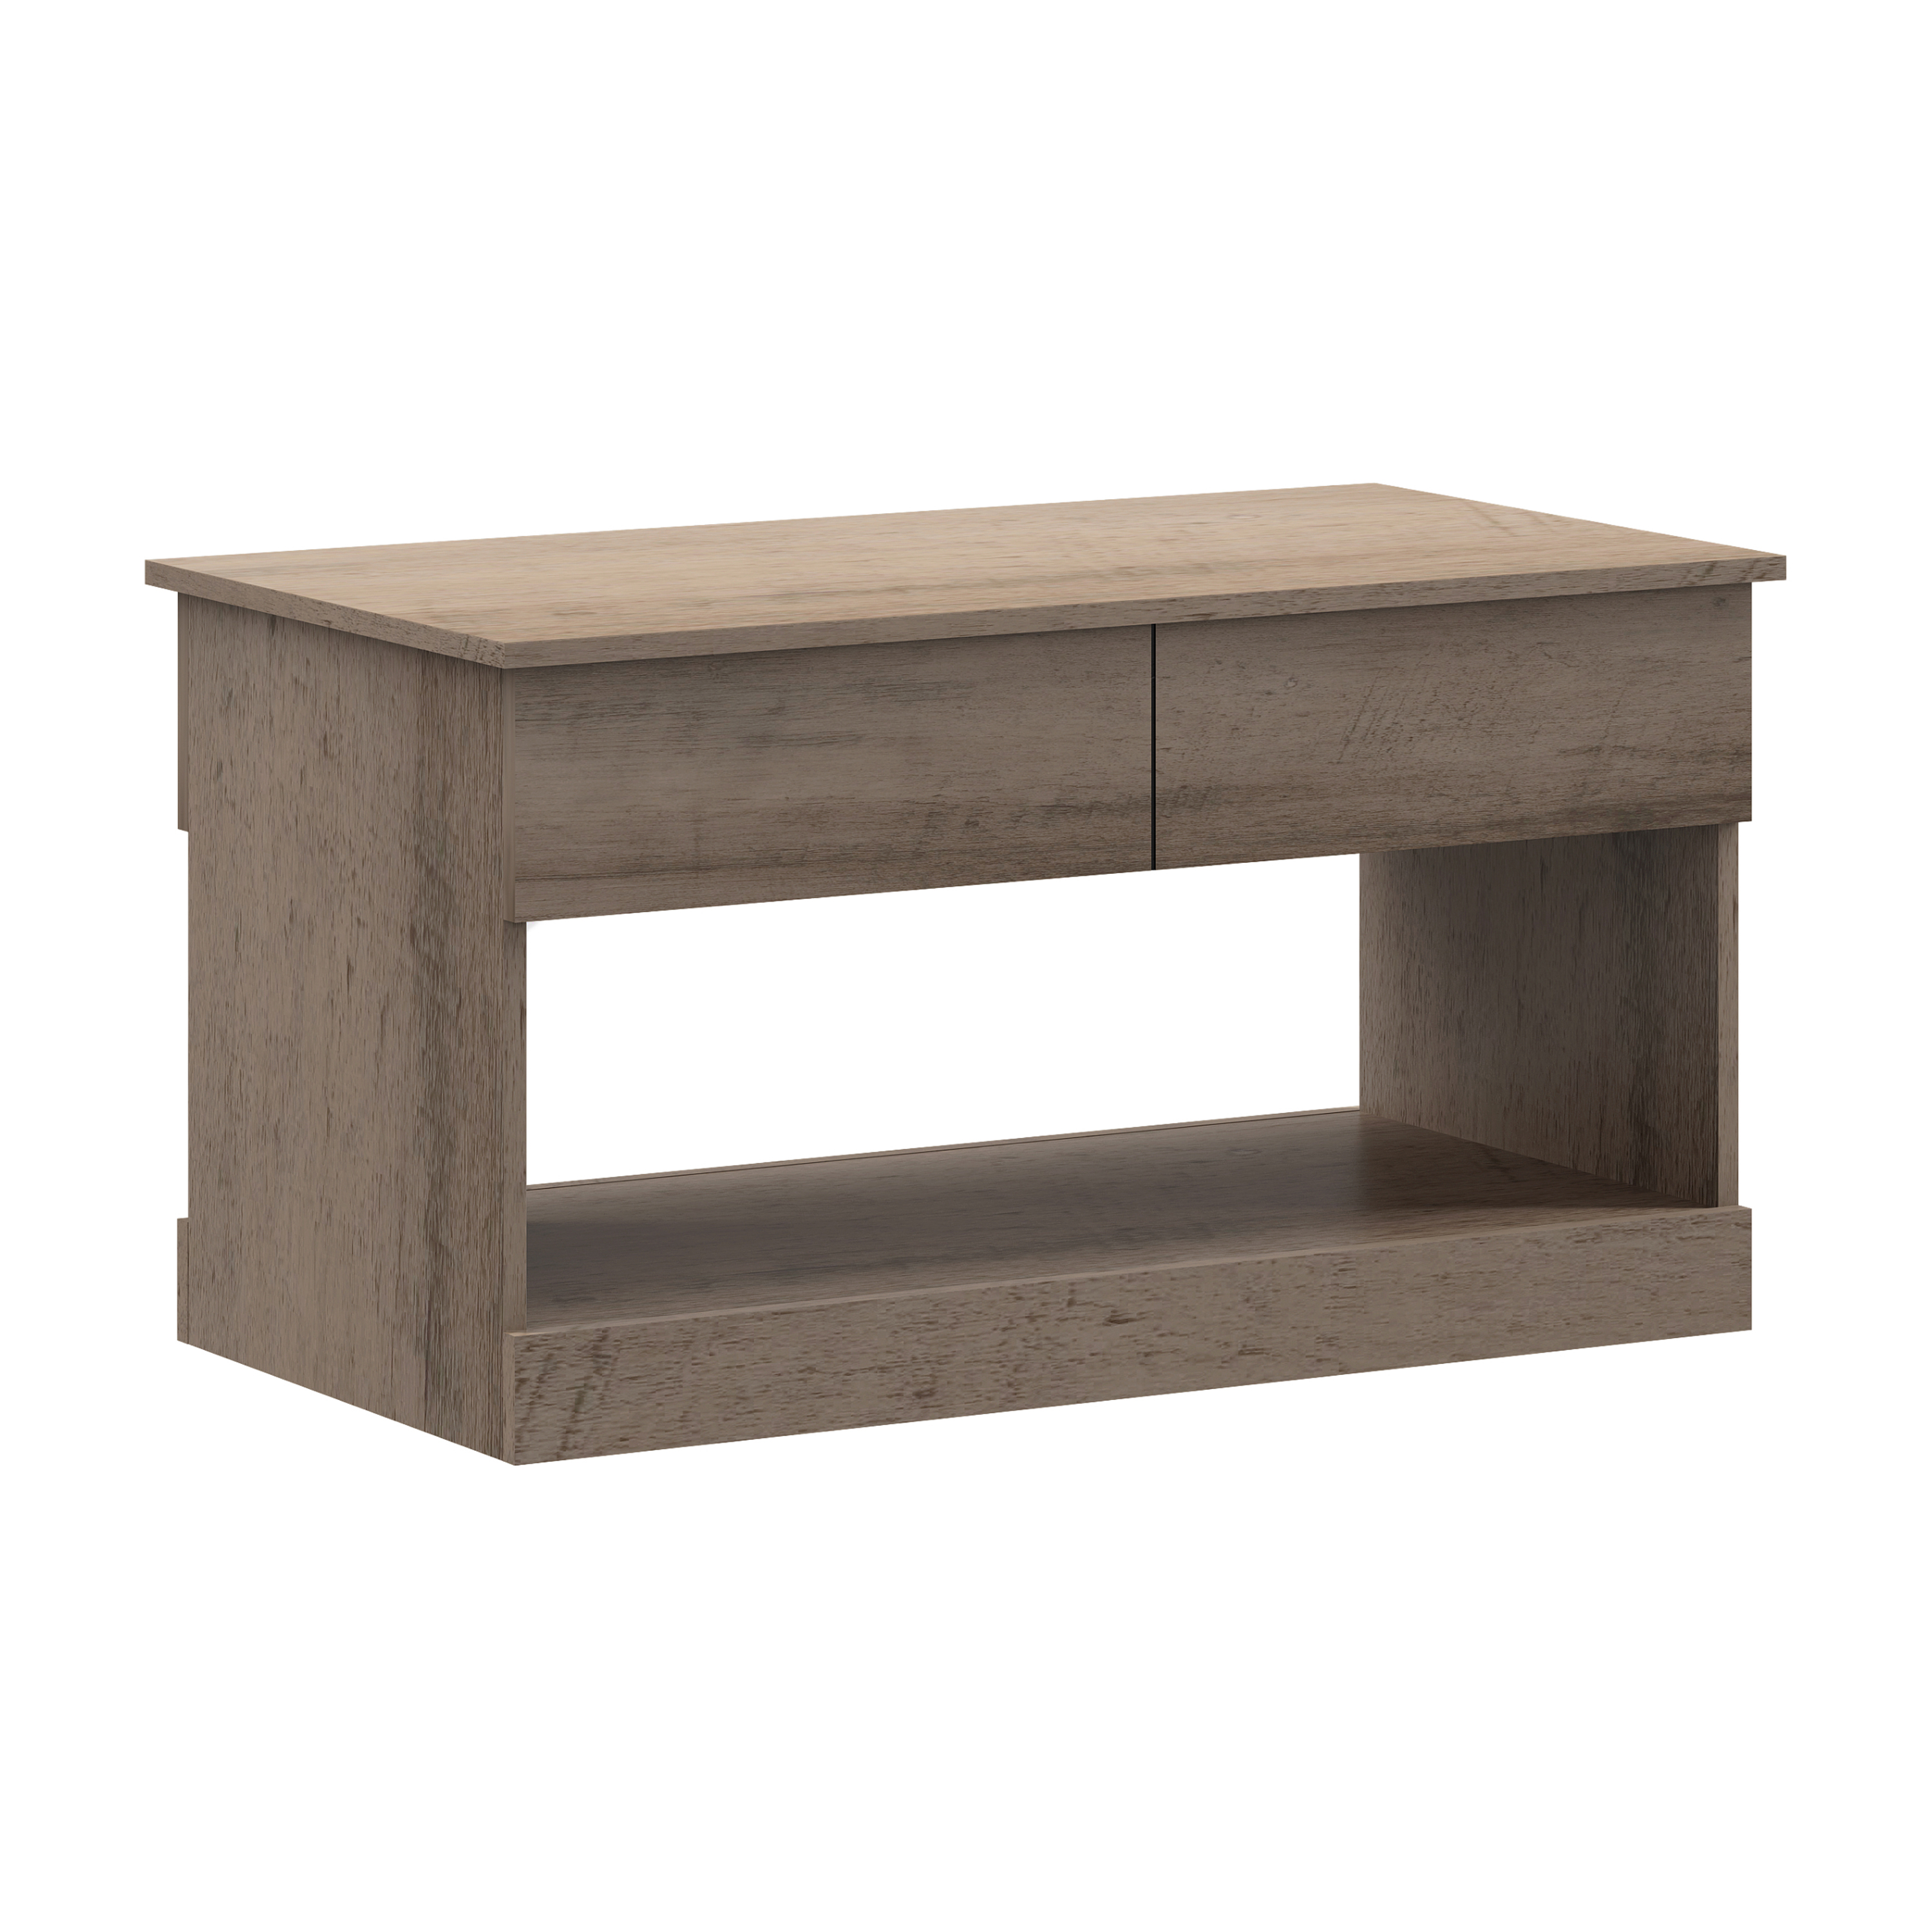 Brindle Rectangular Lift Top Coffee Table, Gray Oak, by Hillsdale Living Essentials - image 4 of 22